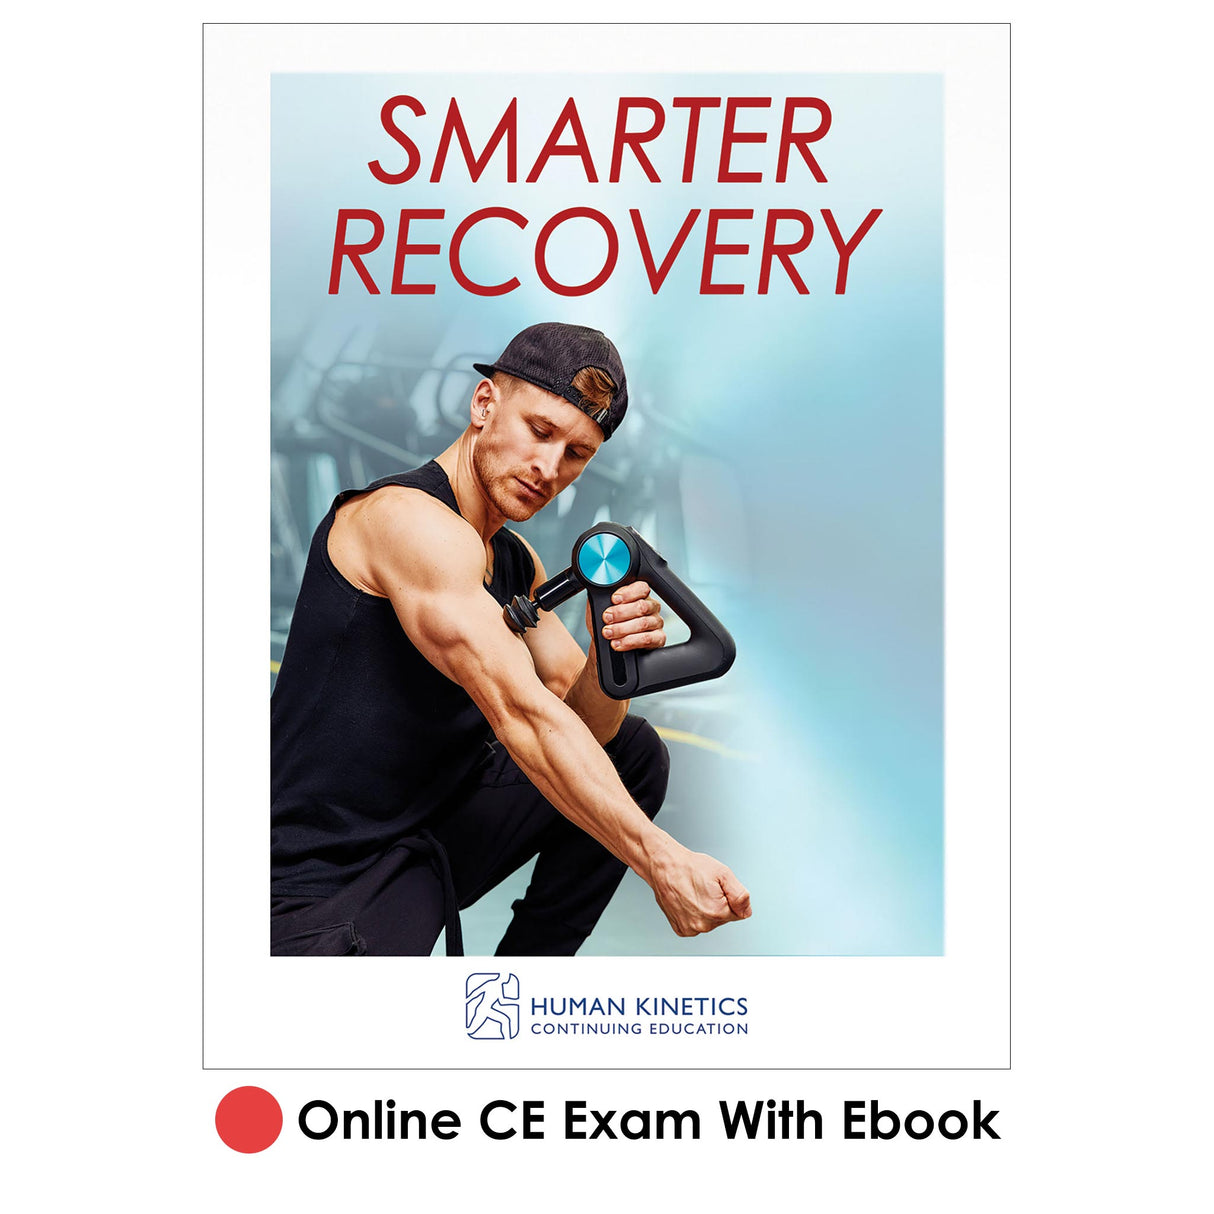 Smarter Recovery Online CE Exam With Ebook